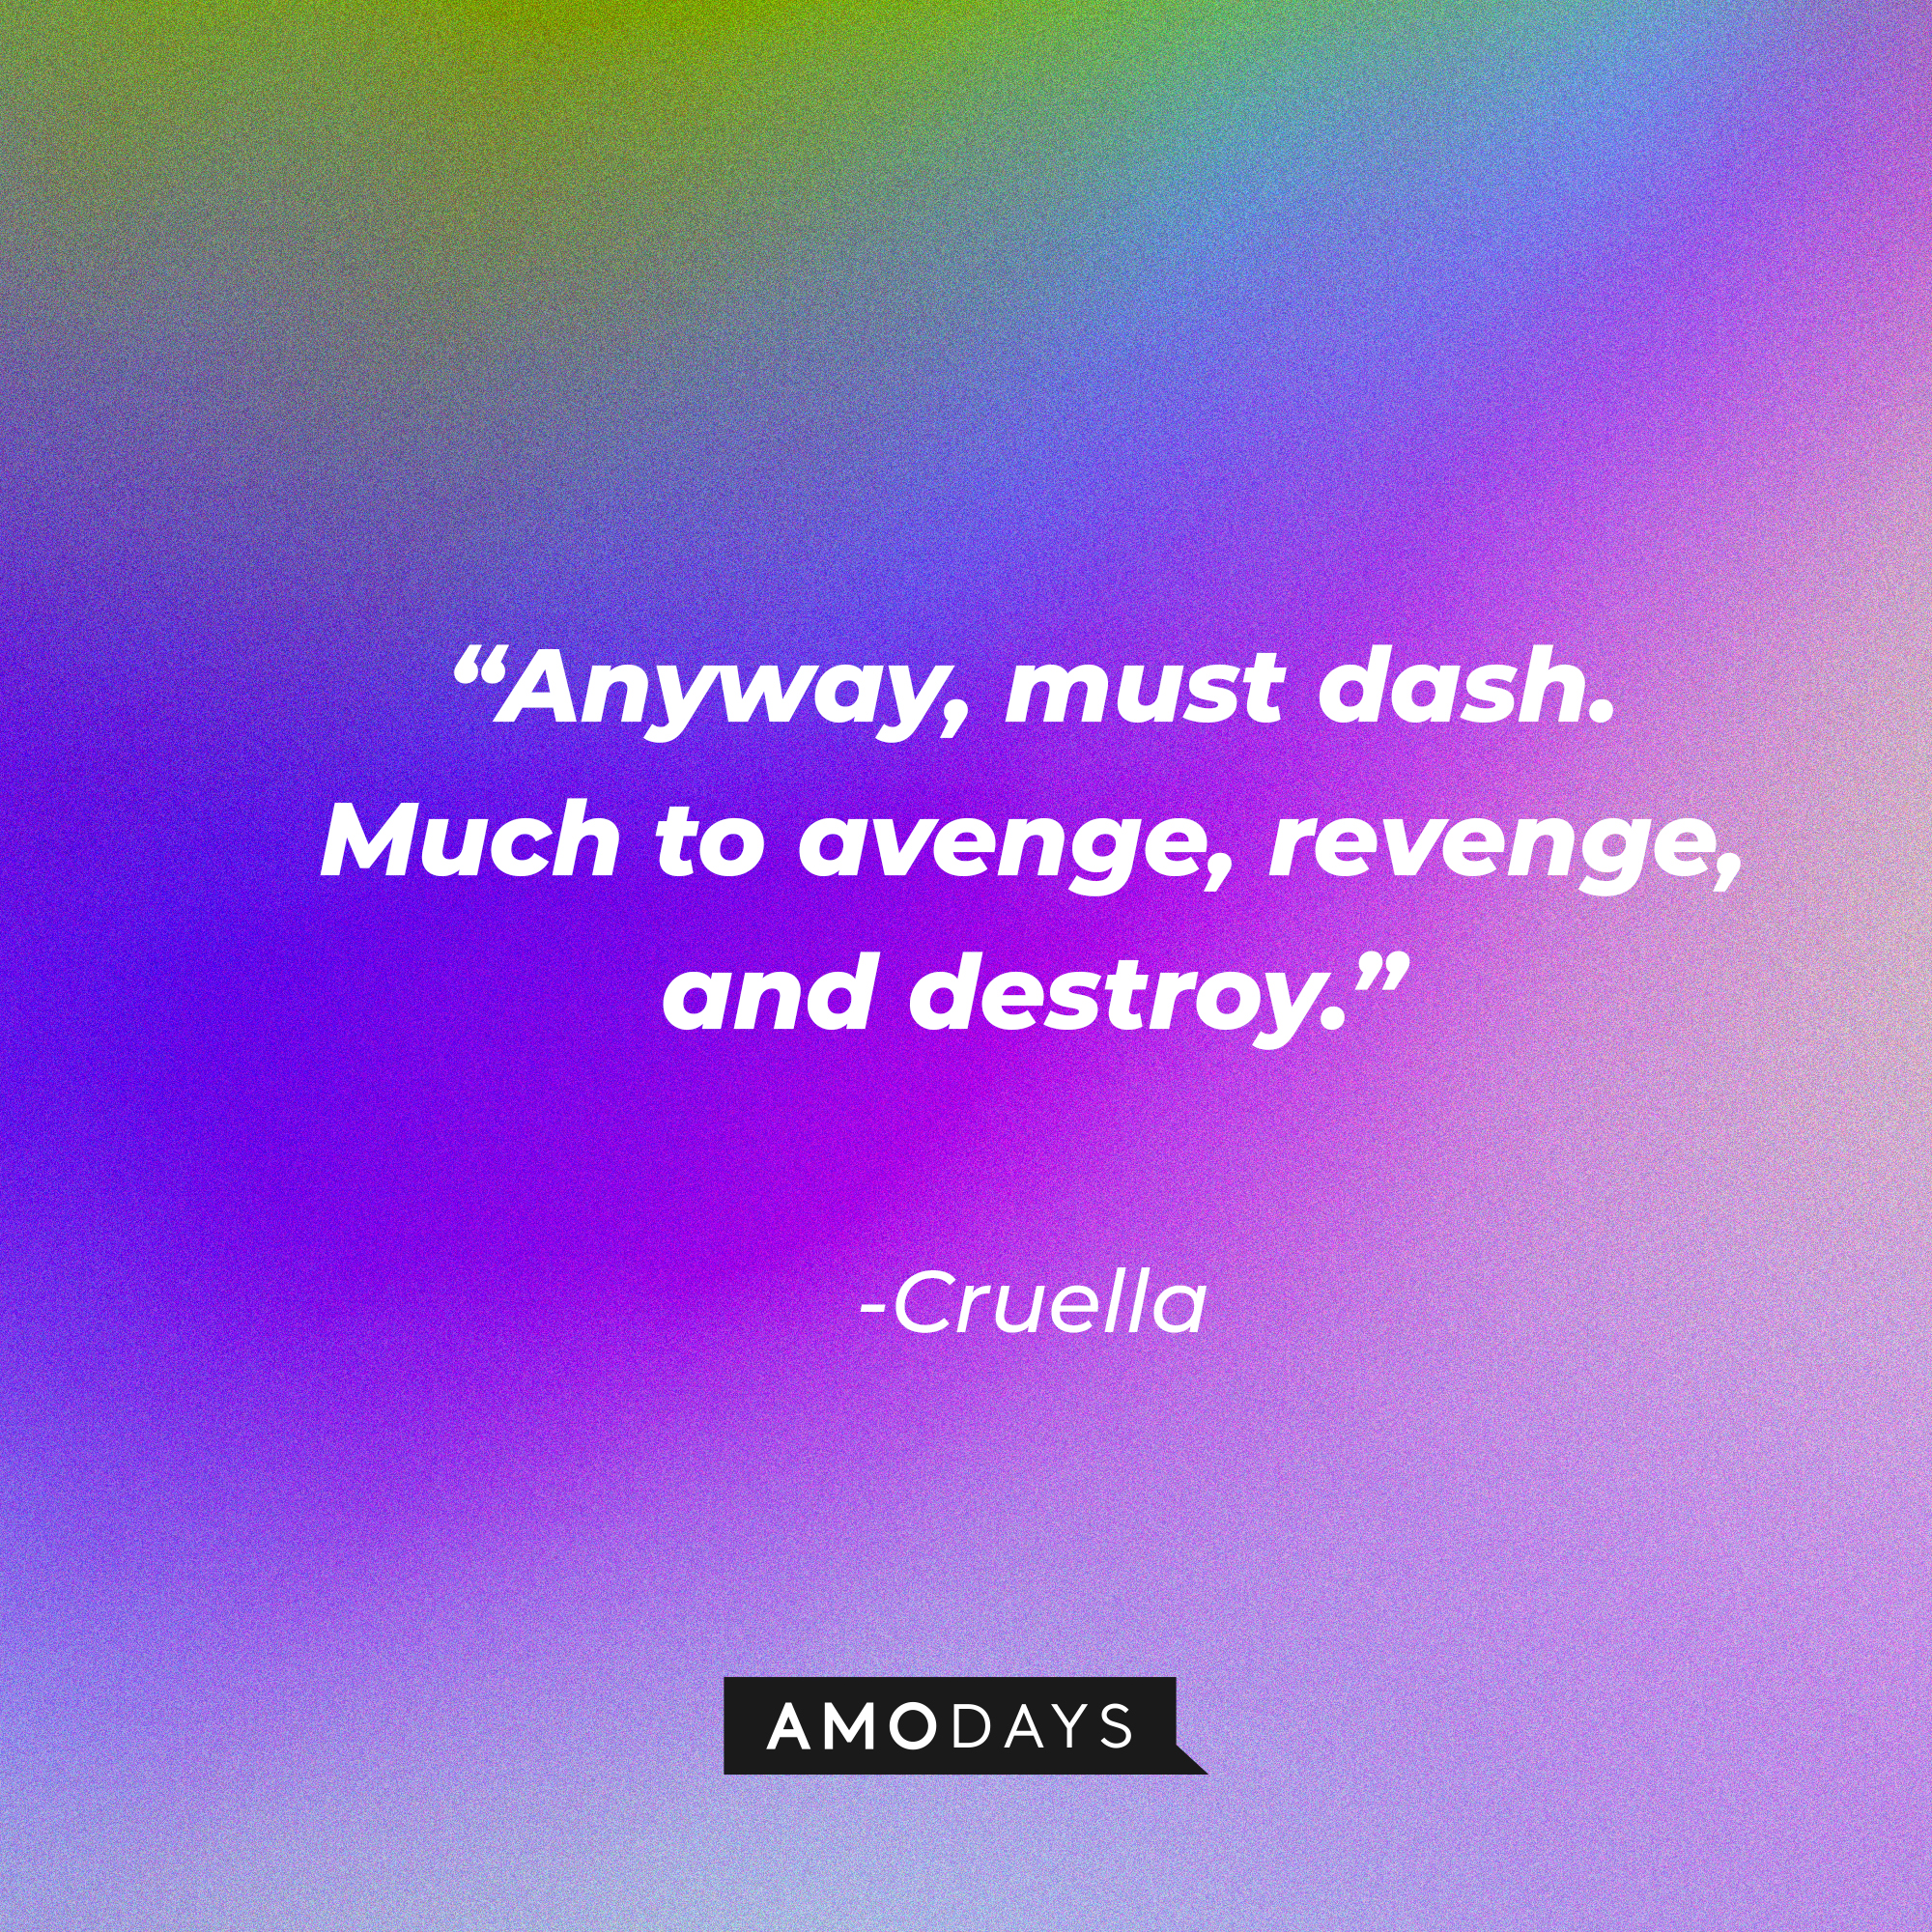 Cruella's quote: “Anyway, must dash. Much to avenge, revenge, and destroy.” | Source: Amodays